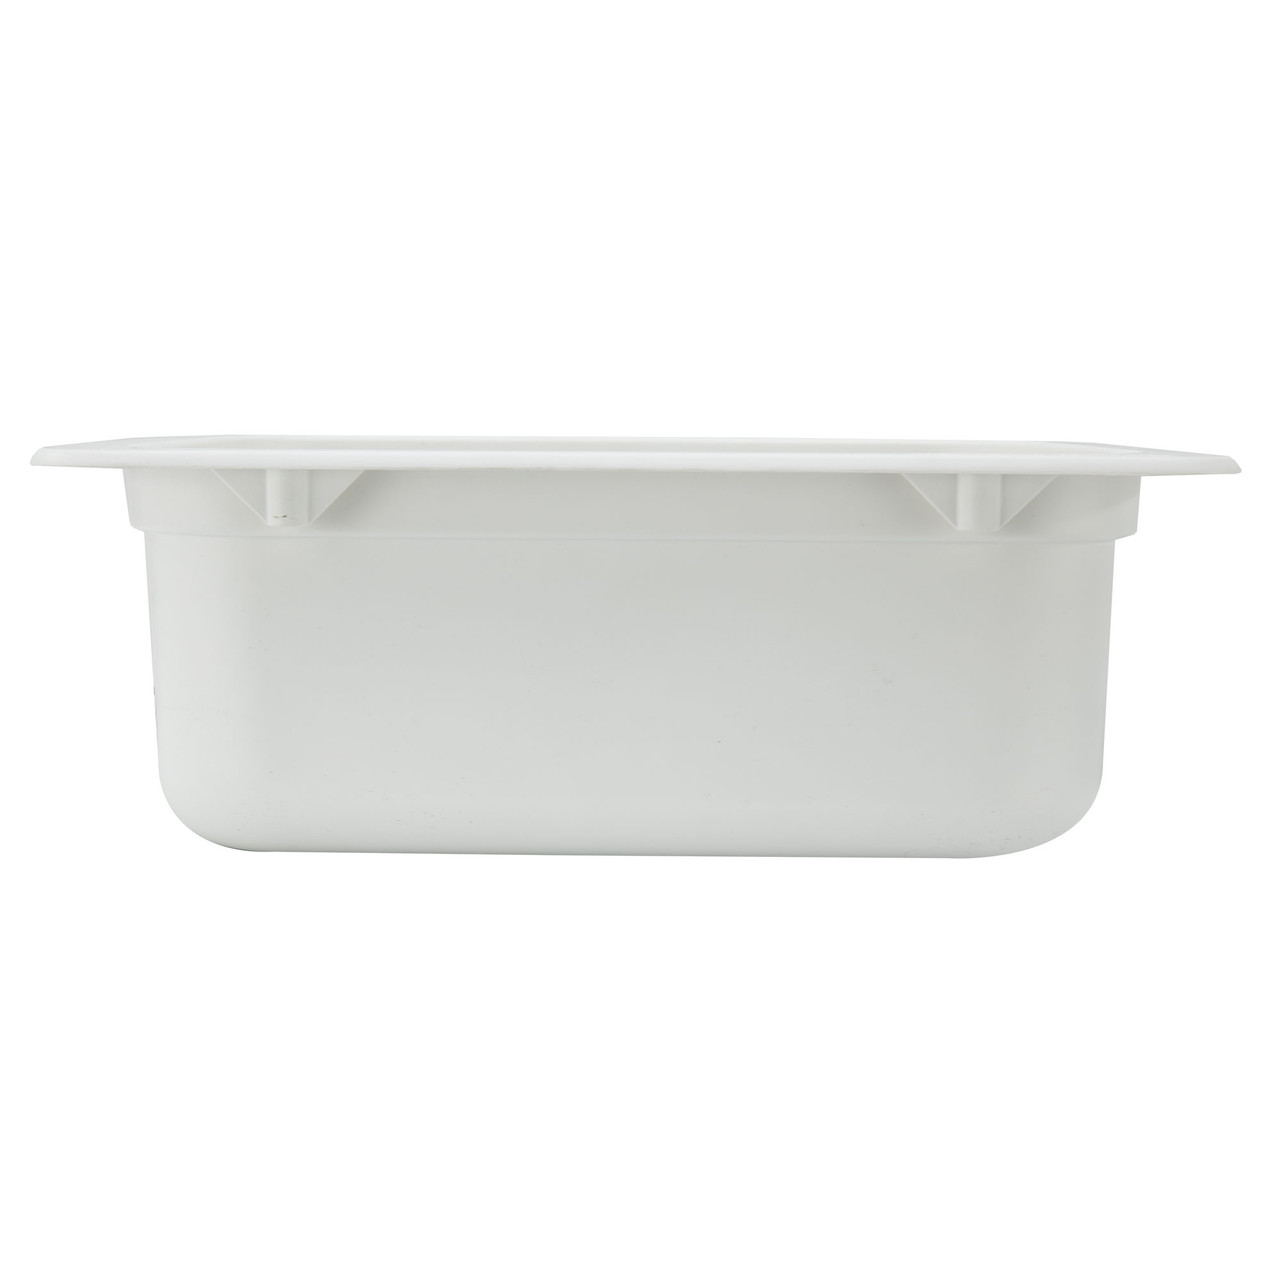 25 x 19 Composite RV Sink - Double Basin - RecPro